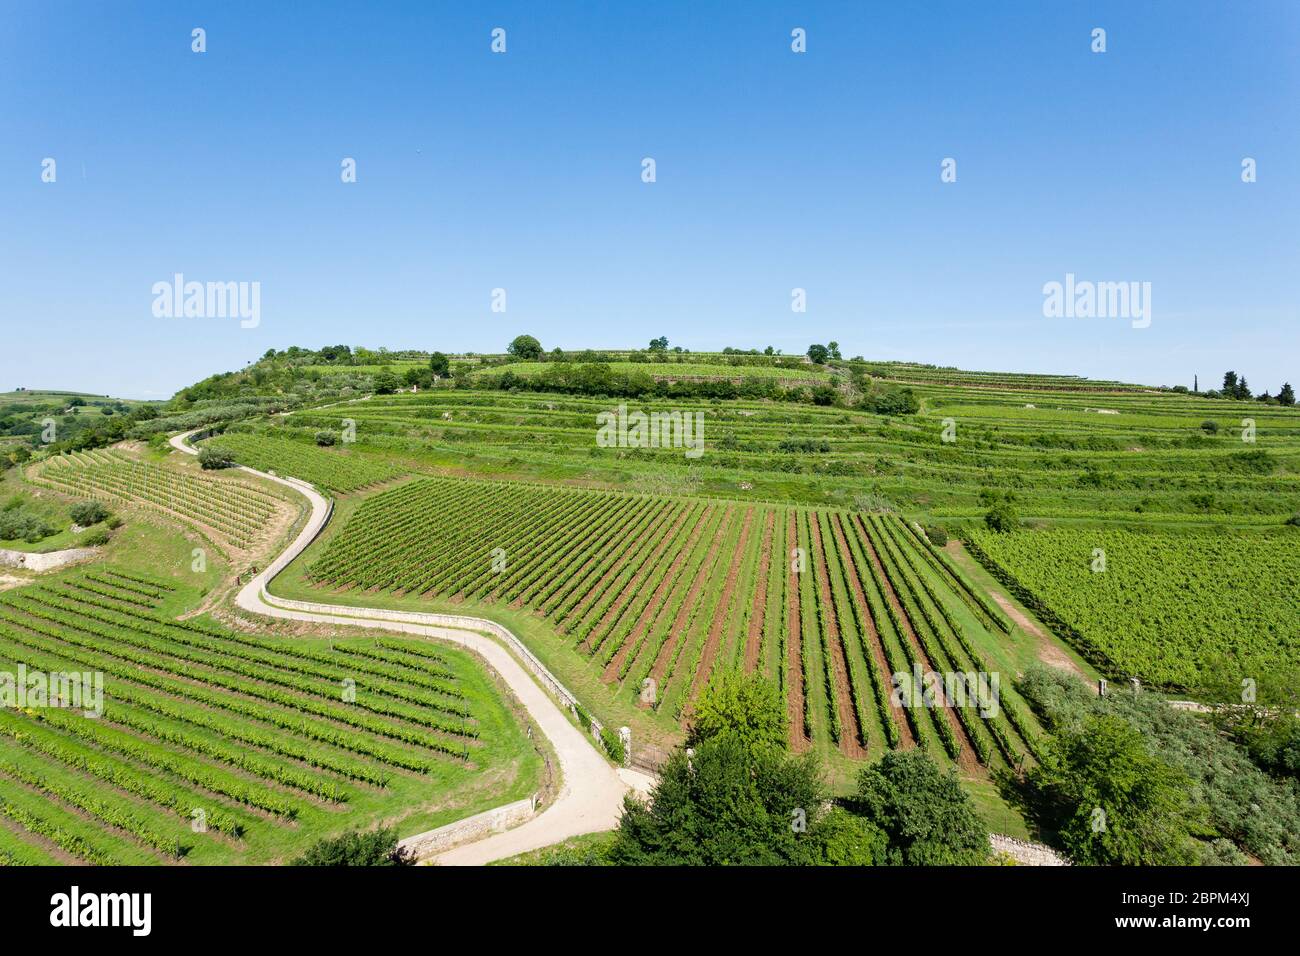 Vineyards from Soave, famous wine area. Italian countryside Stock Photo